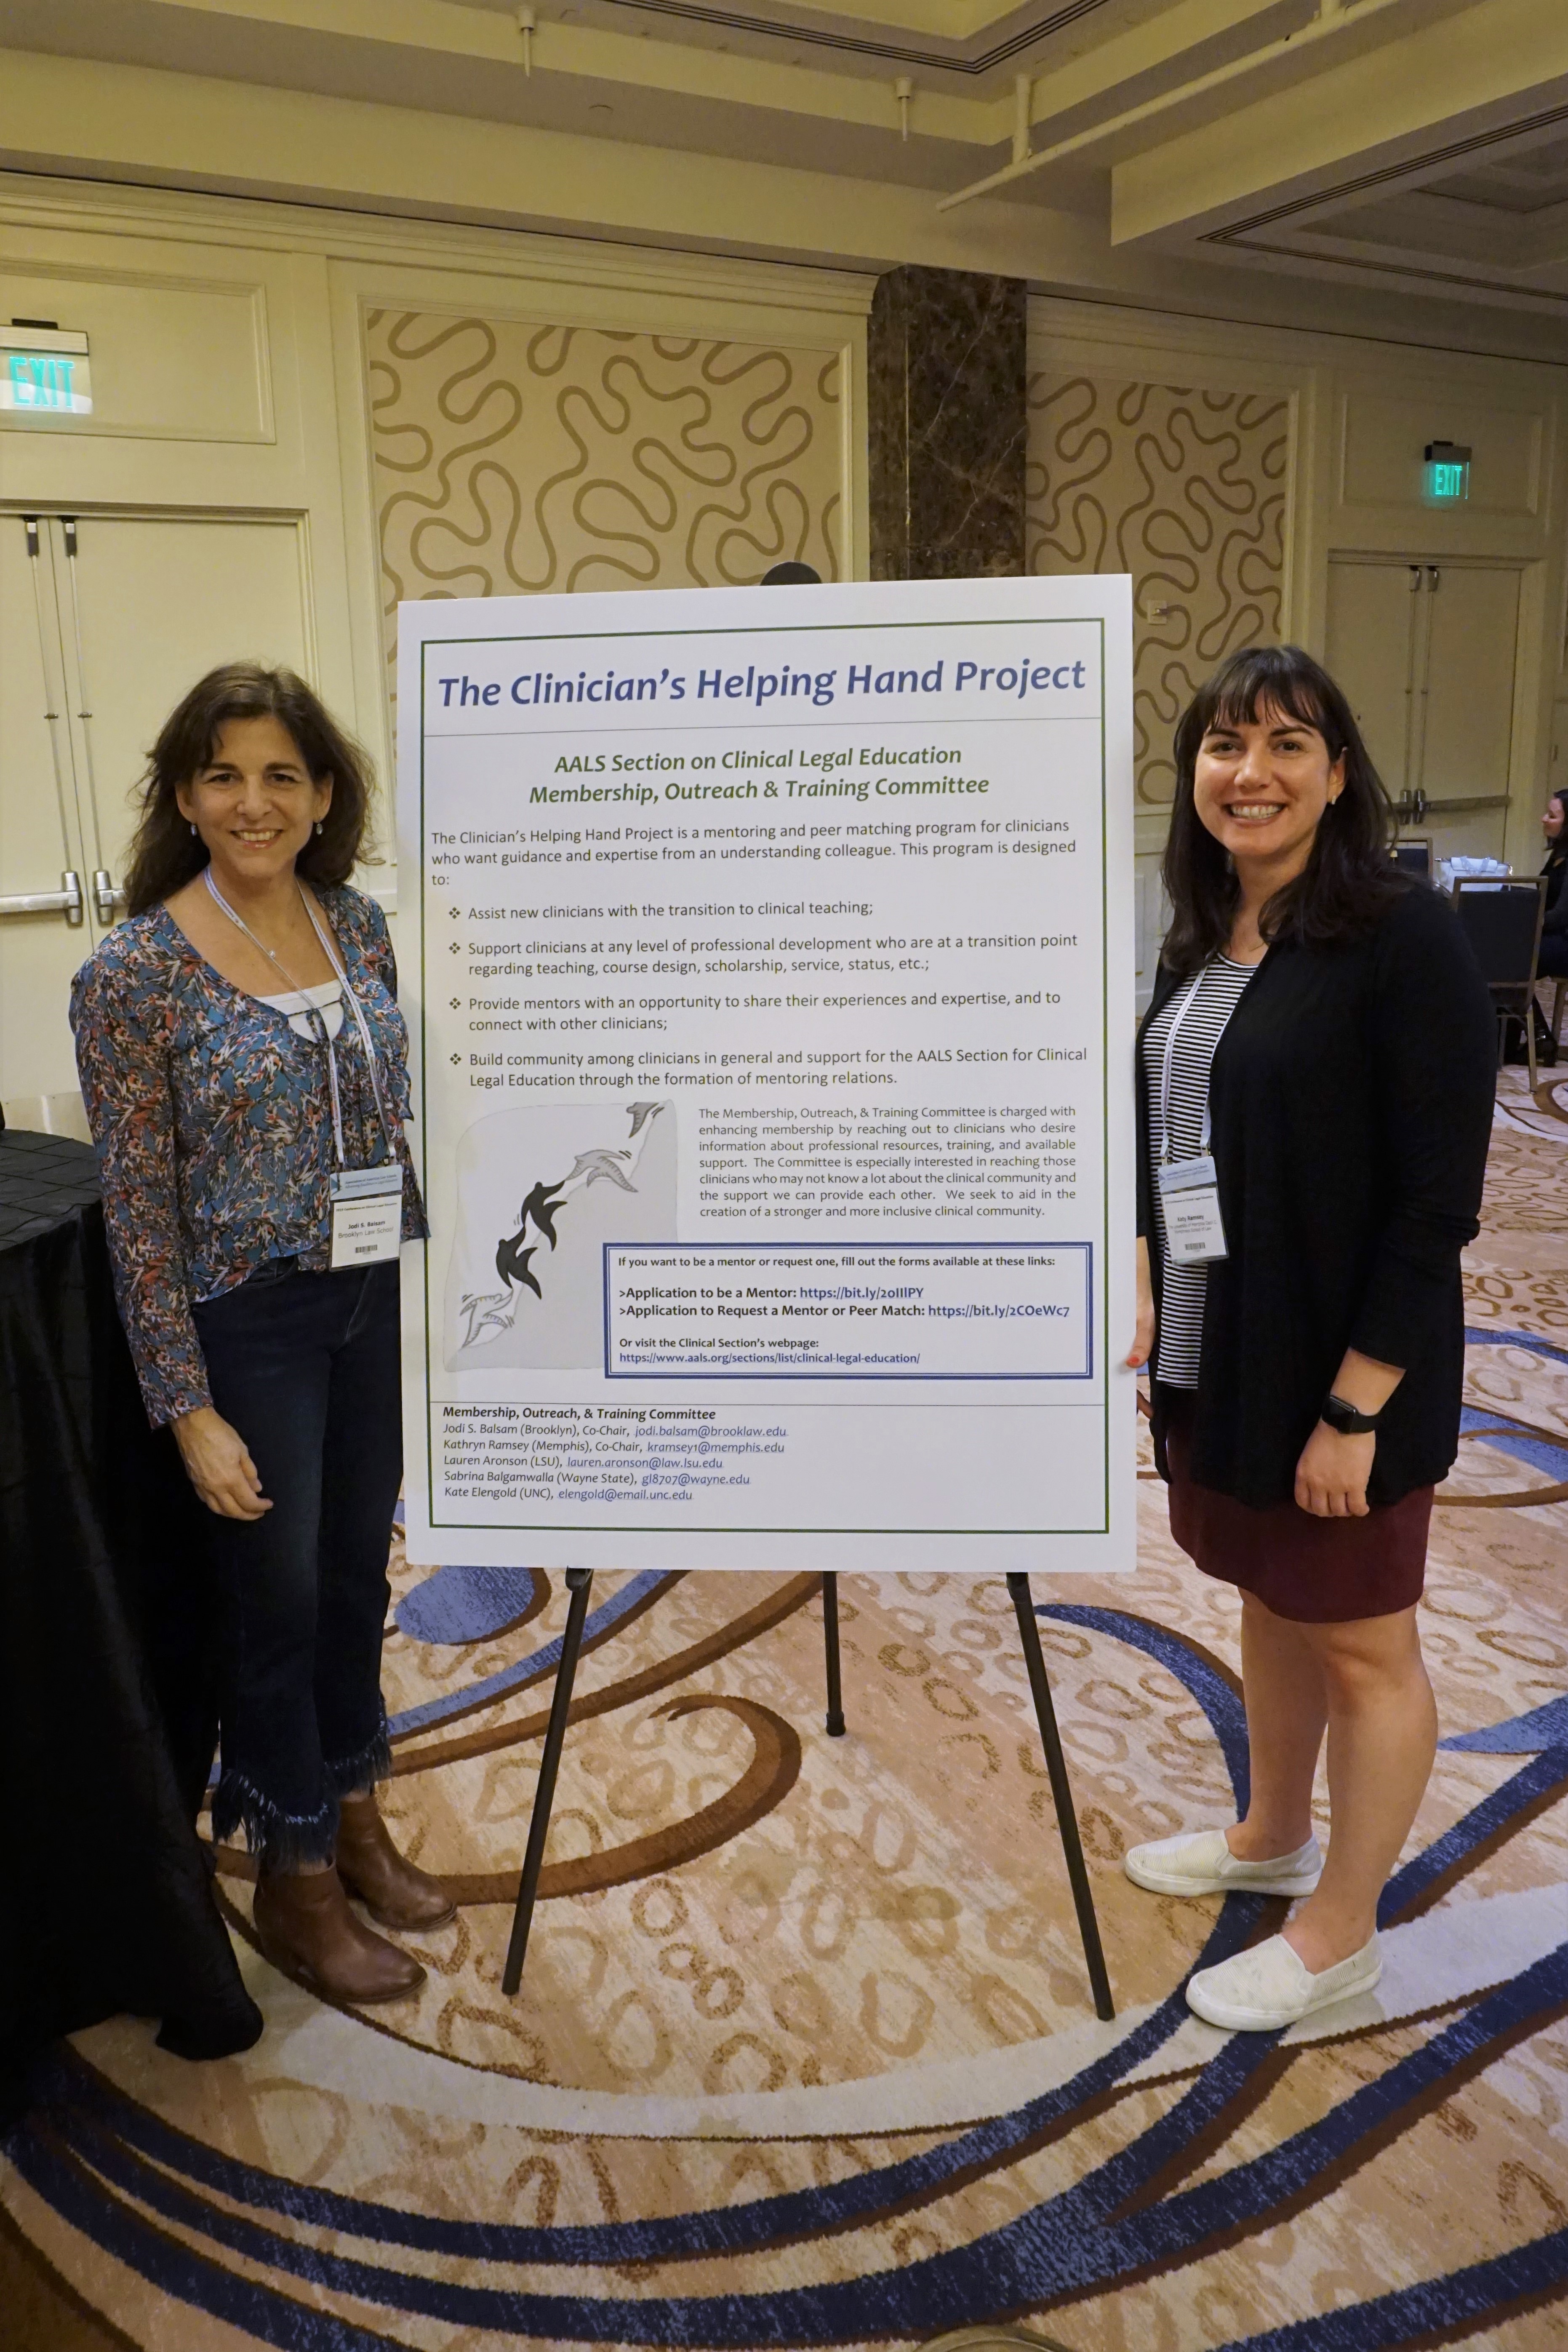 Jodi Balsam (Brooklyn Law) and Katy Ramsey (University of Memphis Law) present their poster on the "Clinician's Helping Hand Project."